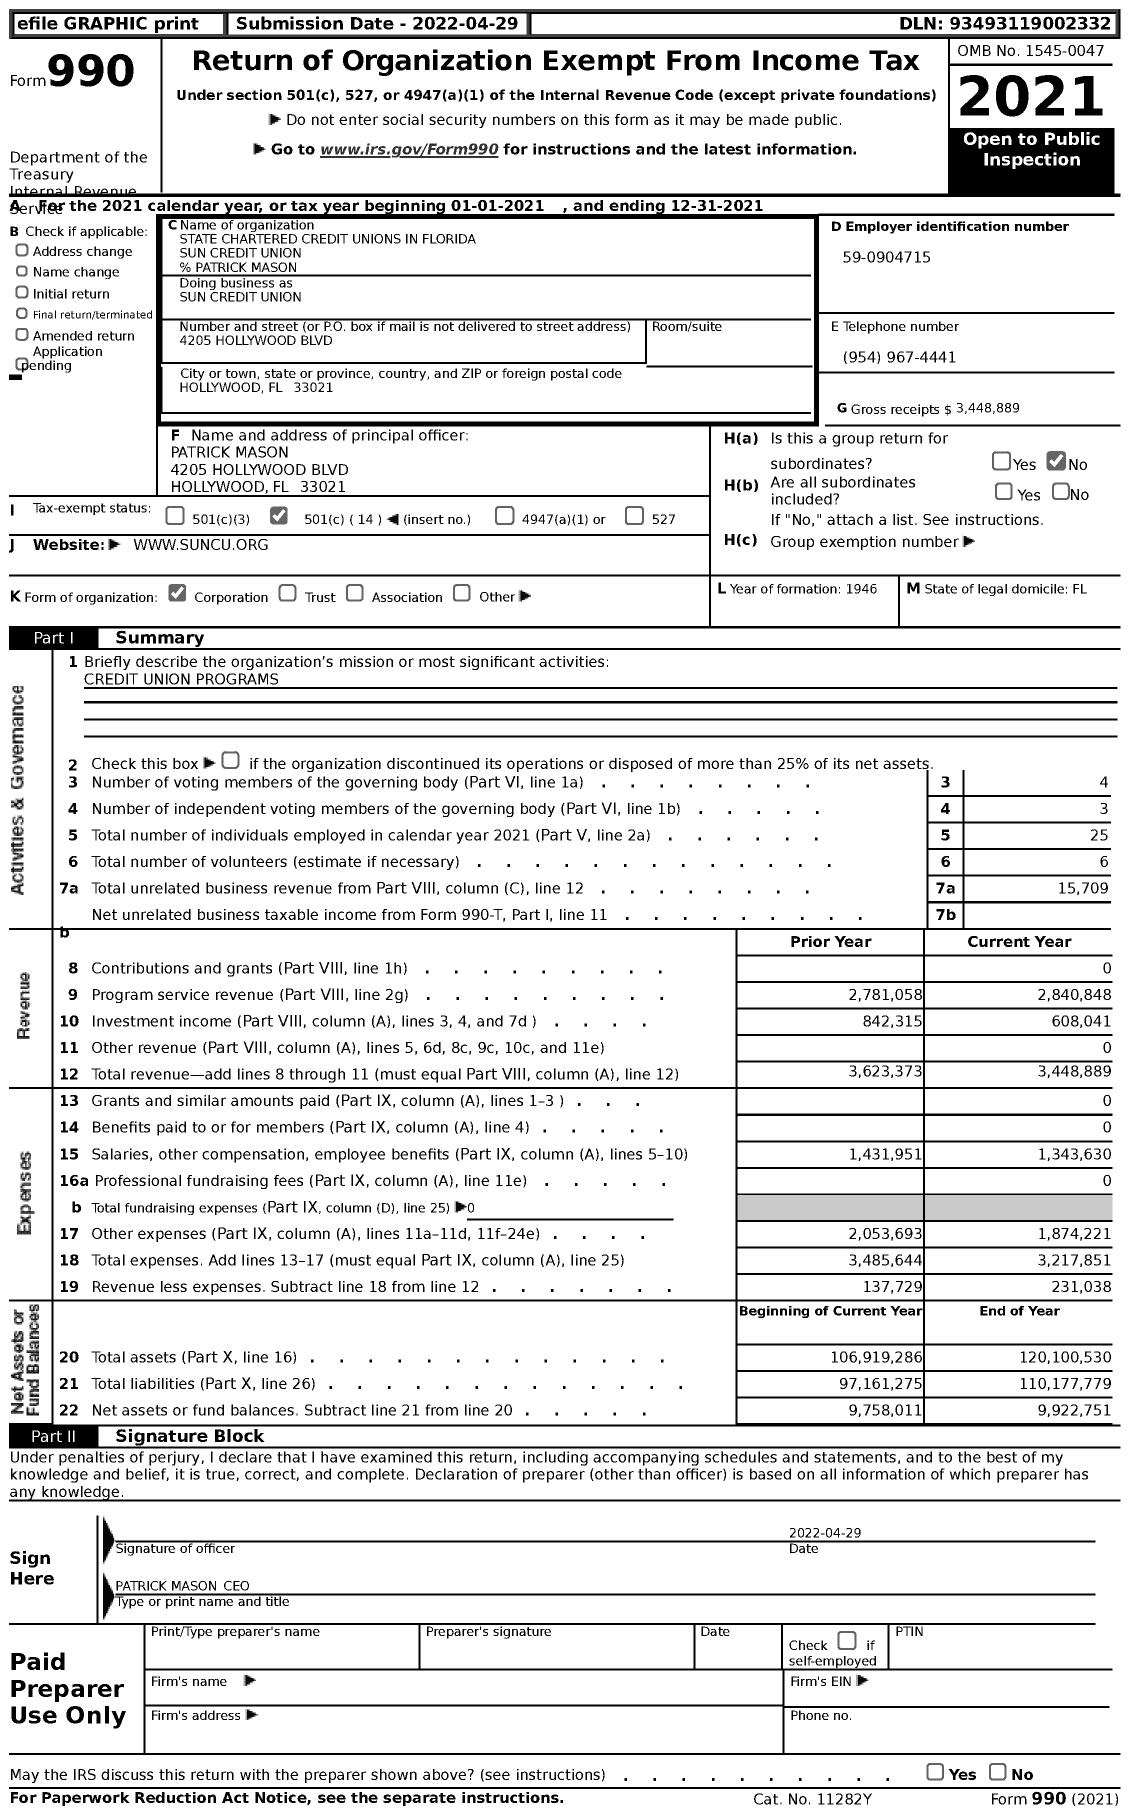 Image of first page of 2021 Form 990 for State Chartered Credit Unions in Florida - 123 Sun Credit Union